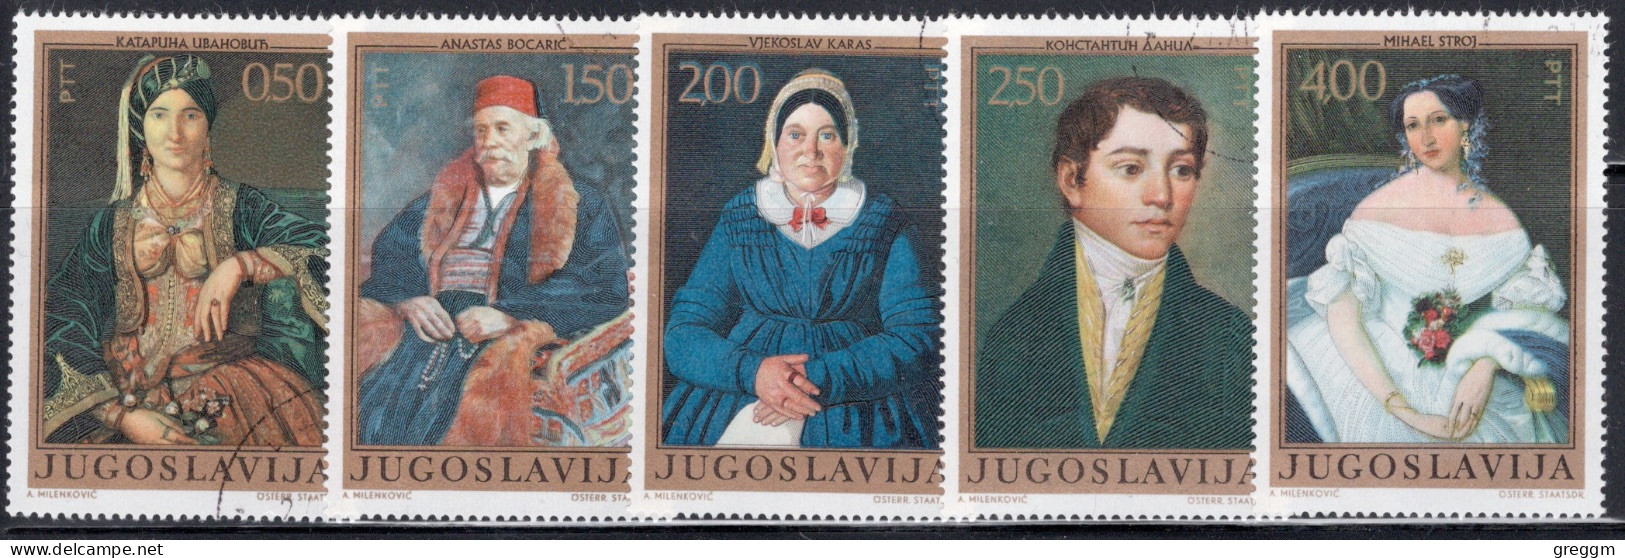 Yugoslavia 1971 Short Set Of Stamps For Portraits From The 19th Century  In Fine Used - Used Stamps